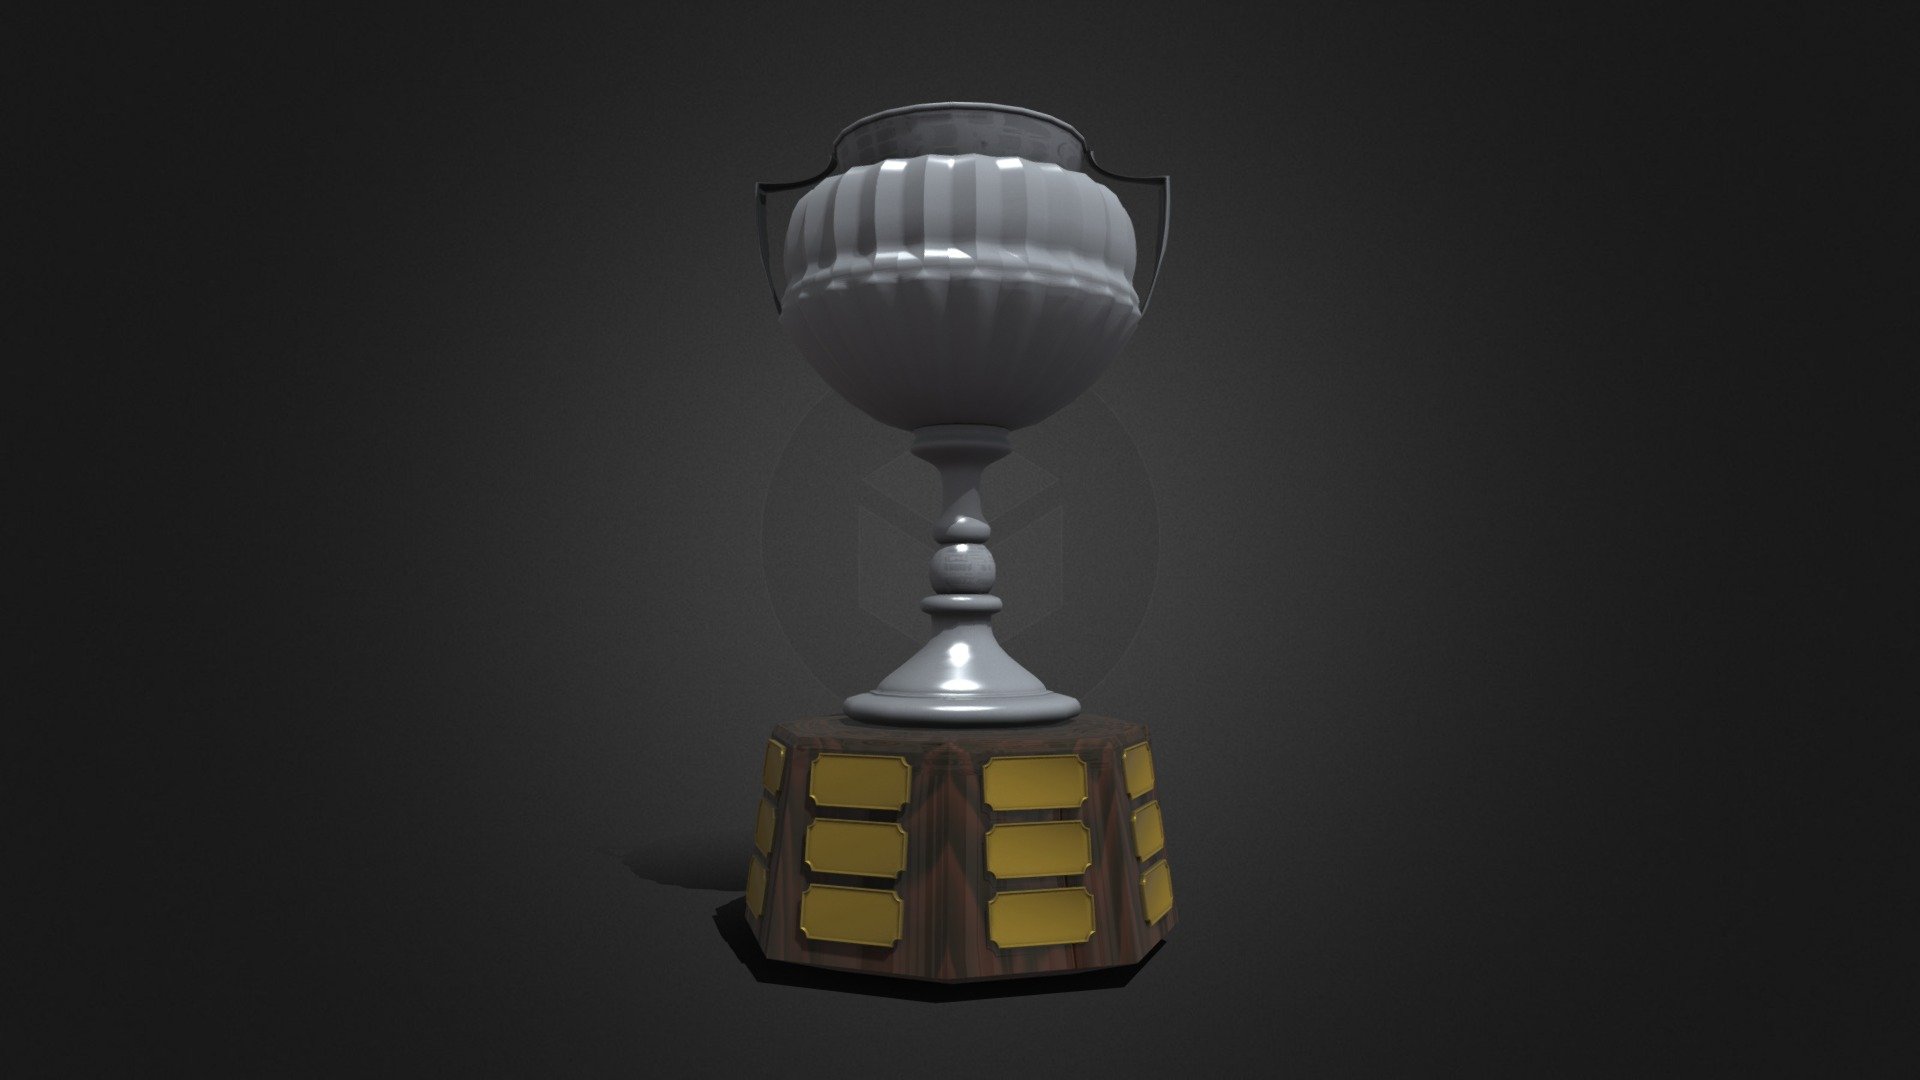 Football soccer cup inspired - Trophy 15 - Trophy Americas Cup - 3D model by jairofula 3d model